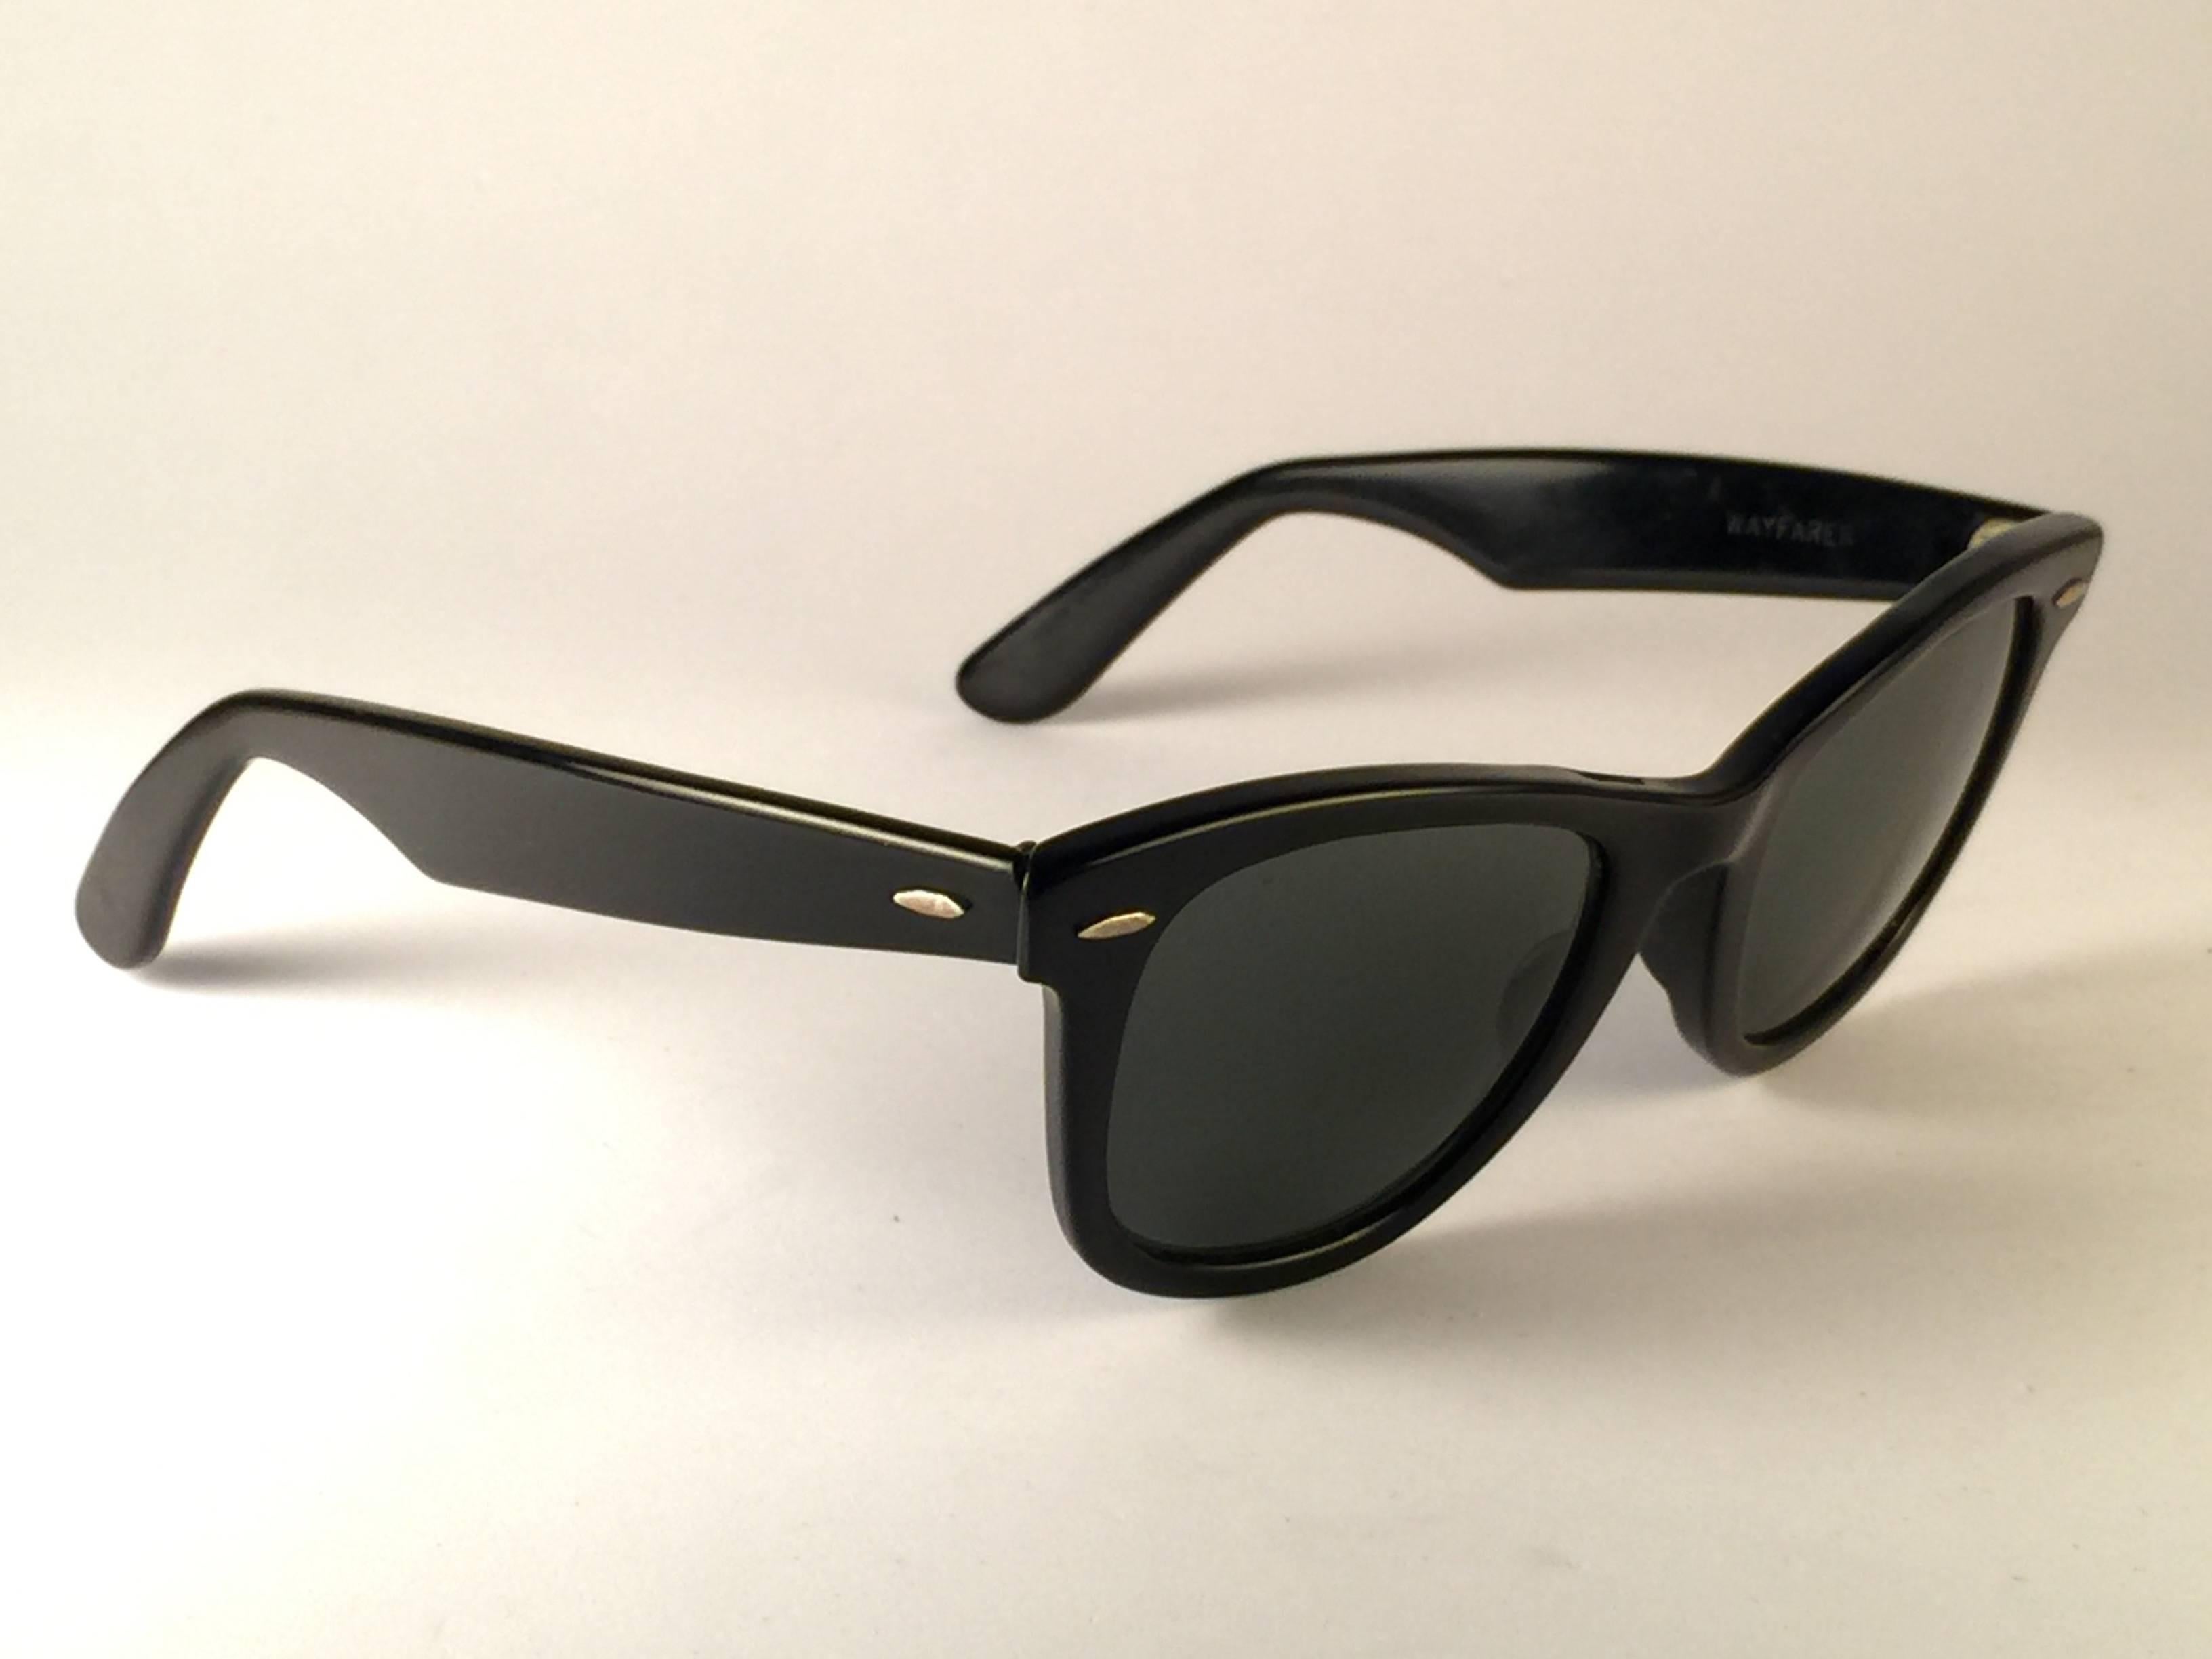 New classic Wayfarer in sleek black.  
B&L etched in both G15 grey lenses. 

Please notice that this item is nearly 40 years old and could show some storage wear.  

New, ever worn or displayed. Made in USA.